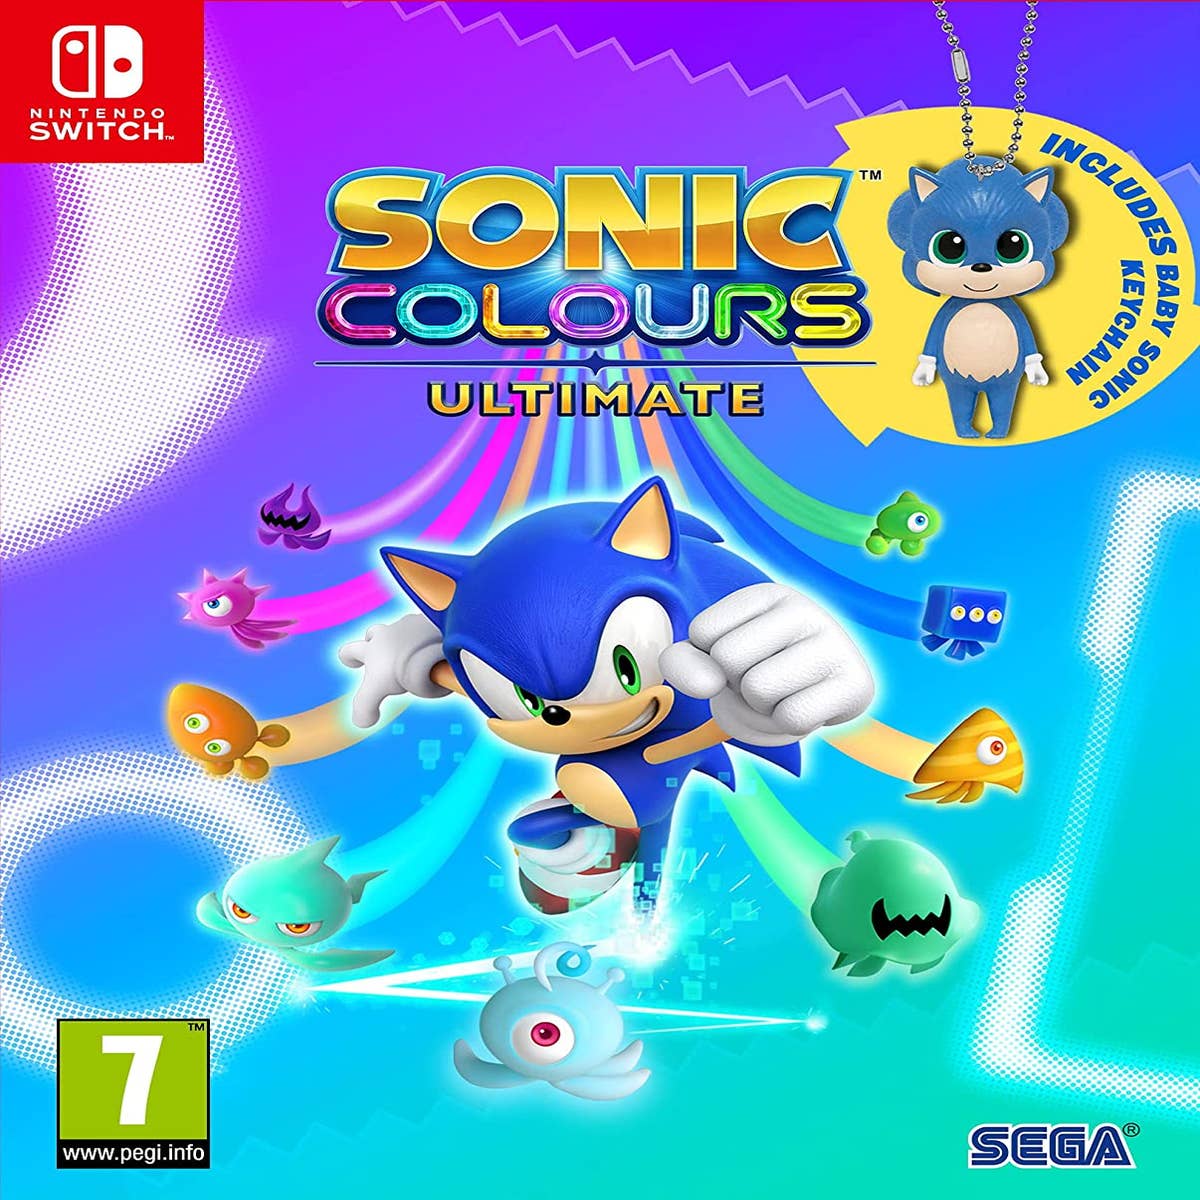 Sonic Colors (DS) - The Cover Project